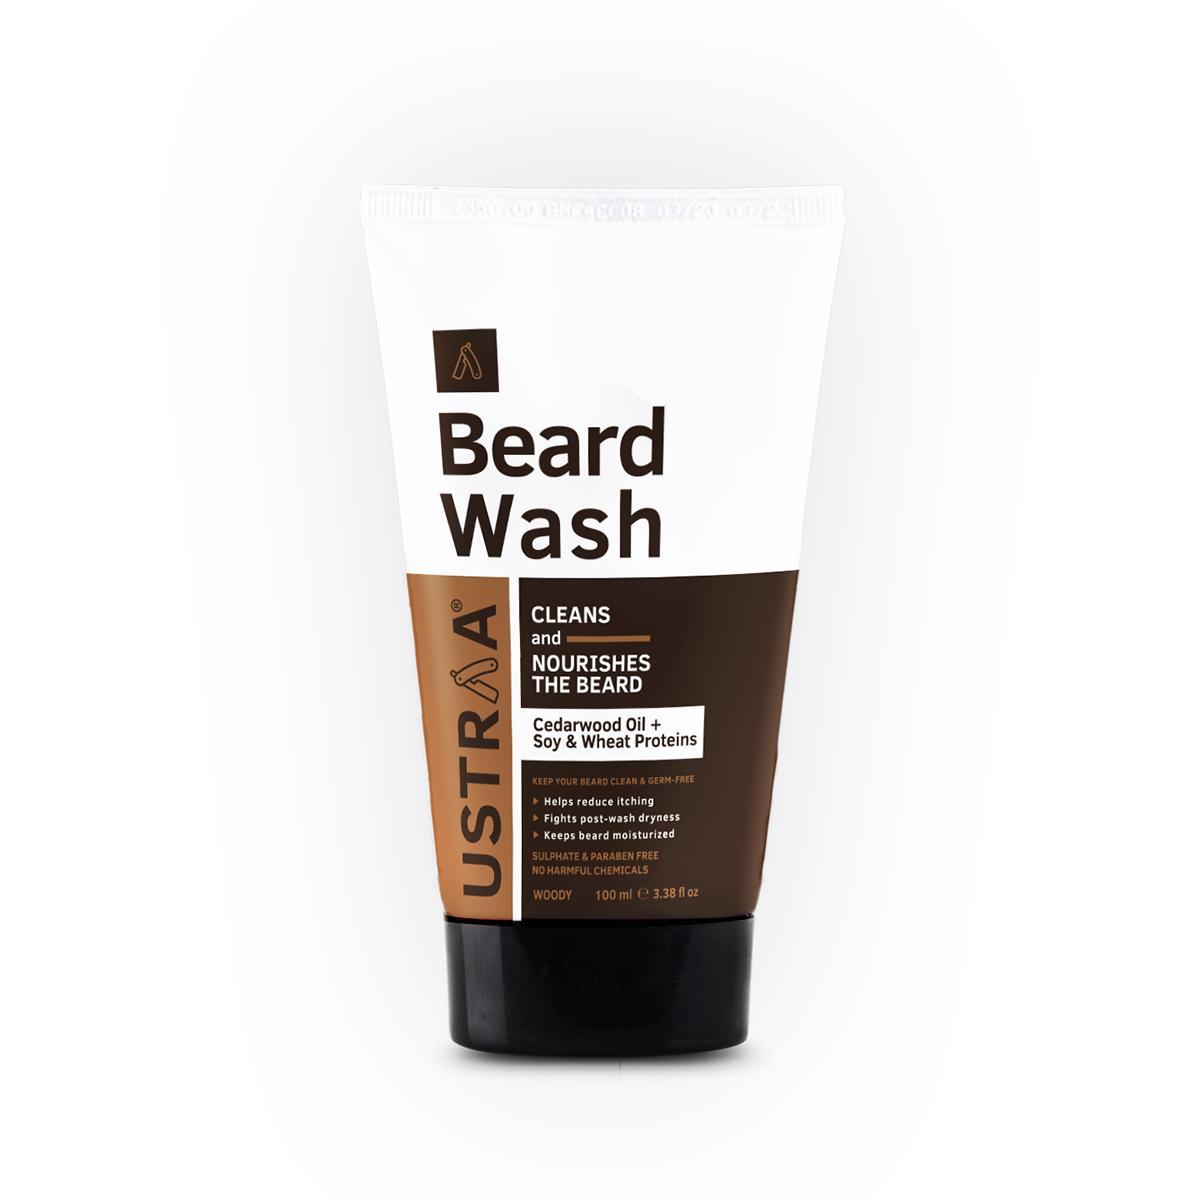 Ustraa Beard Wash (Woody) with Soy & Wheat Proteins - Provides Deep Cleansing and Mositurization - Keeps Beard Germ and Grit Free - 100g